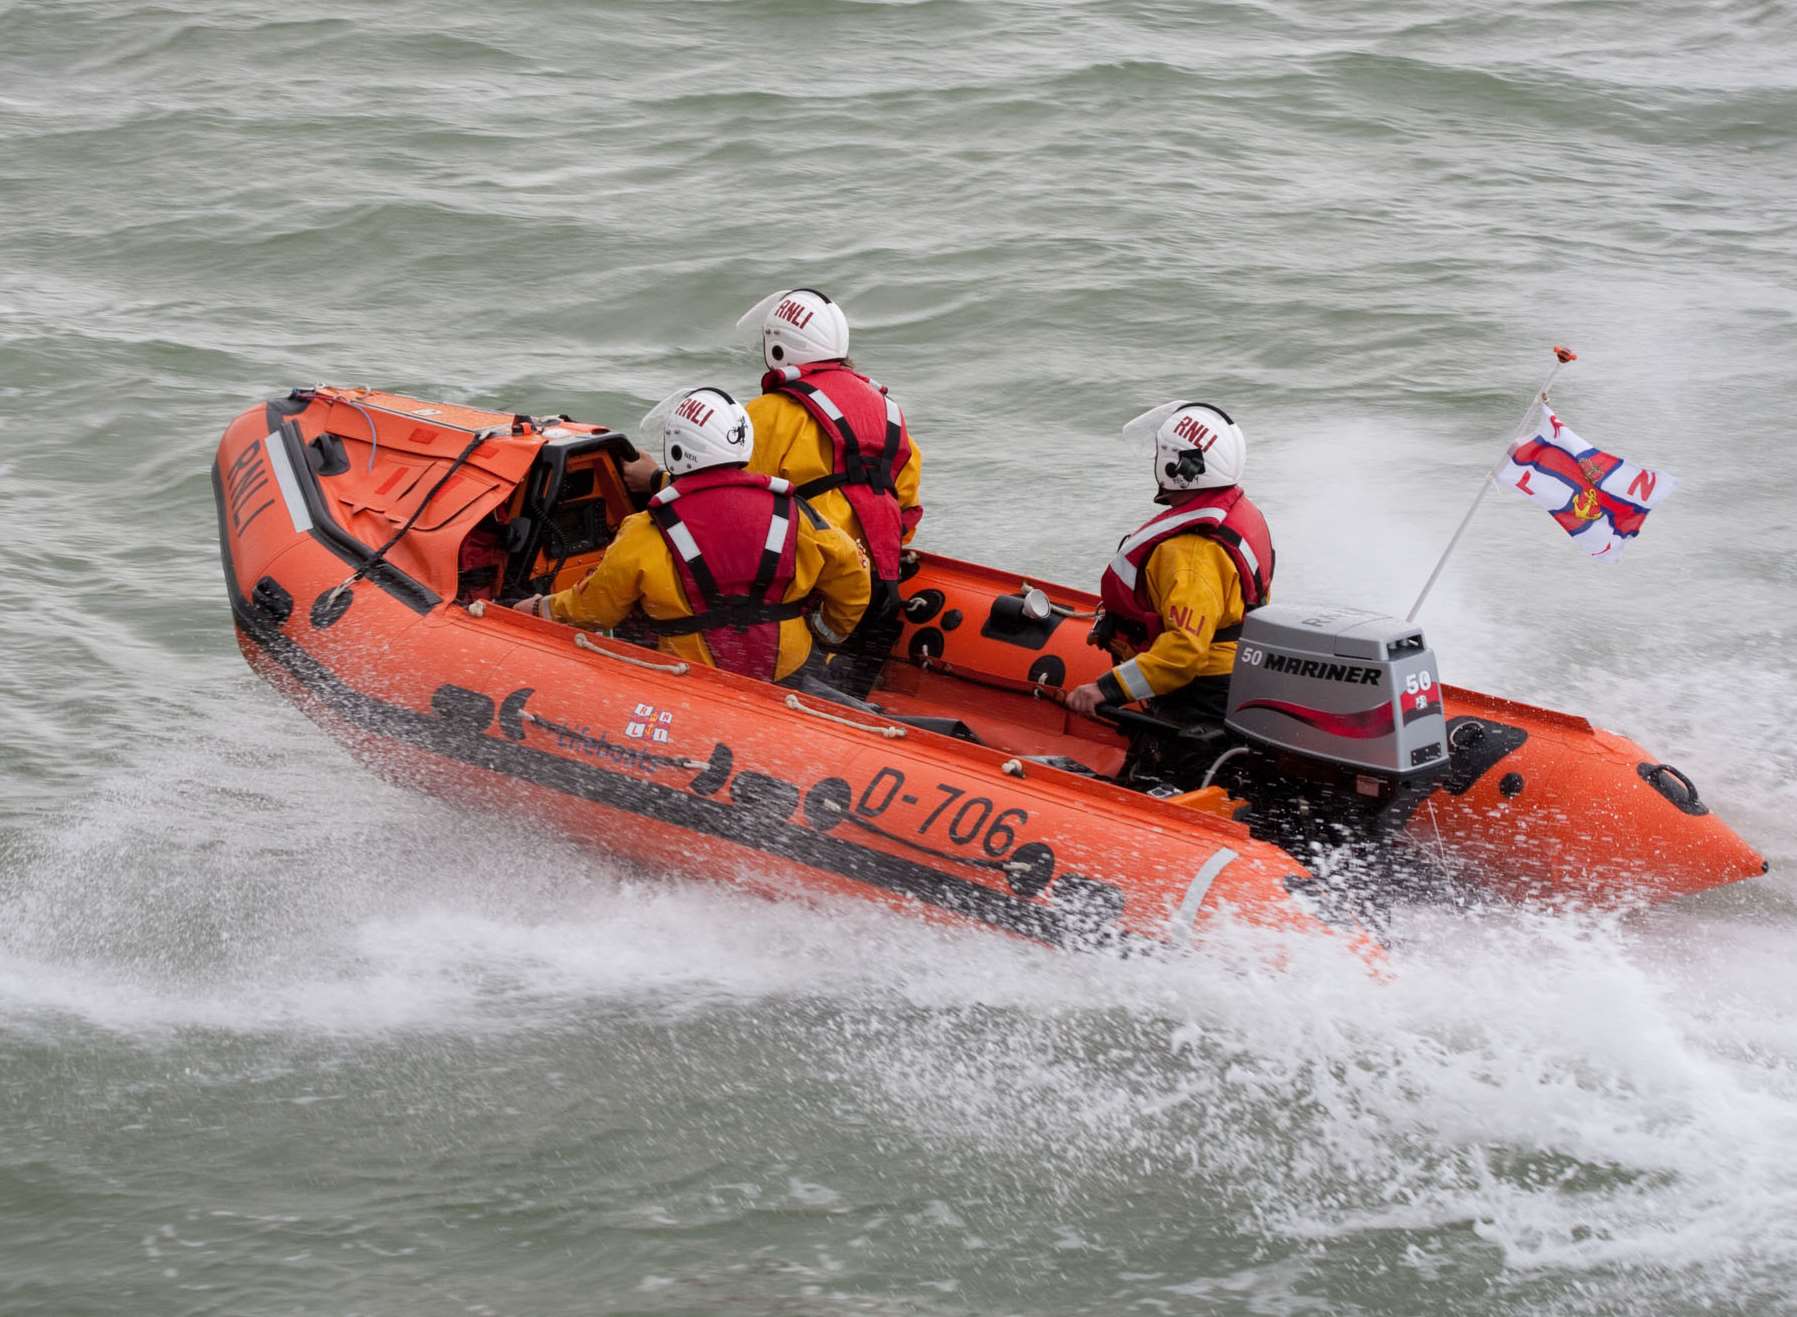 The Margate RNLI inshore lifeboat